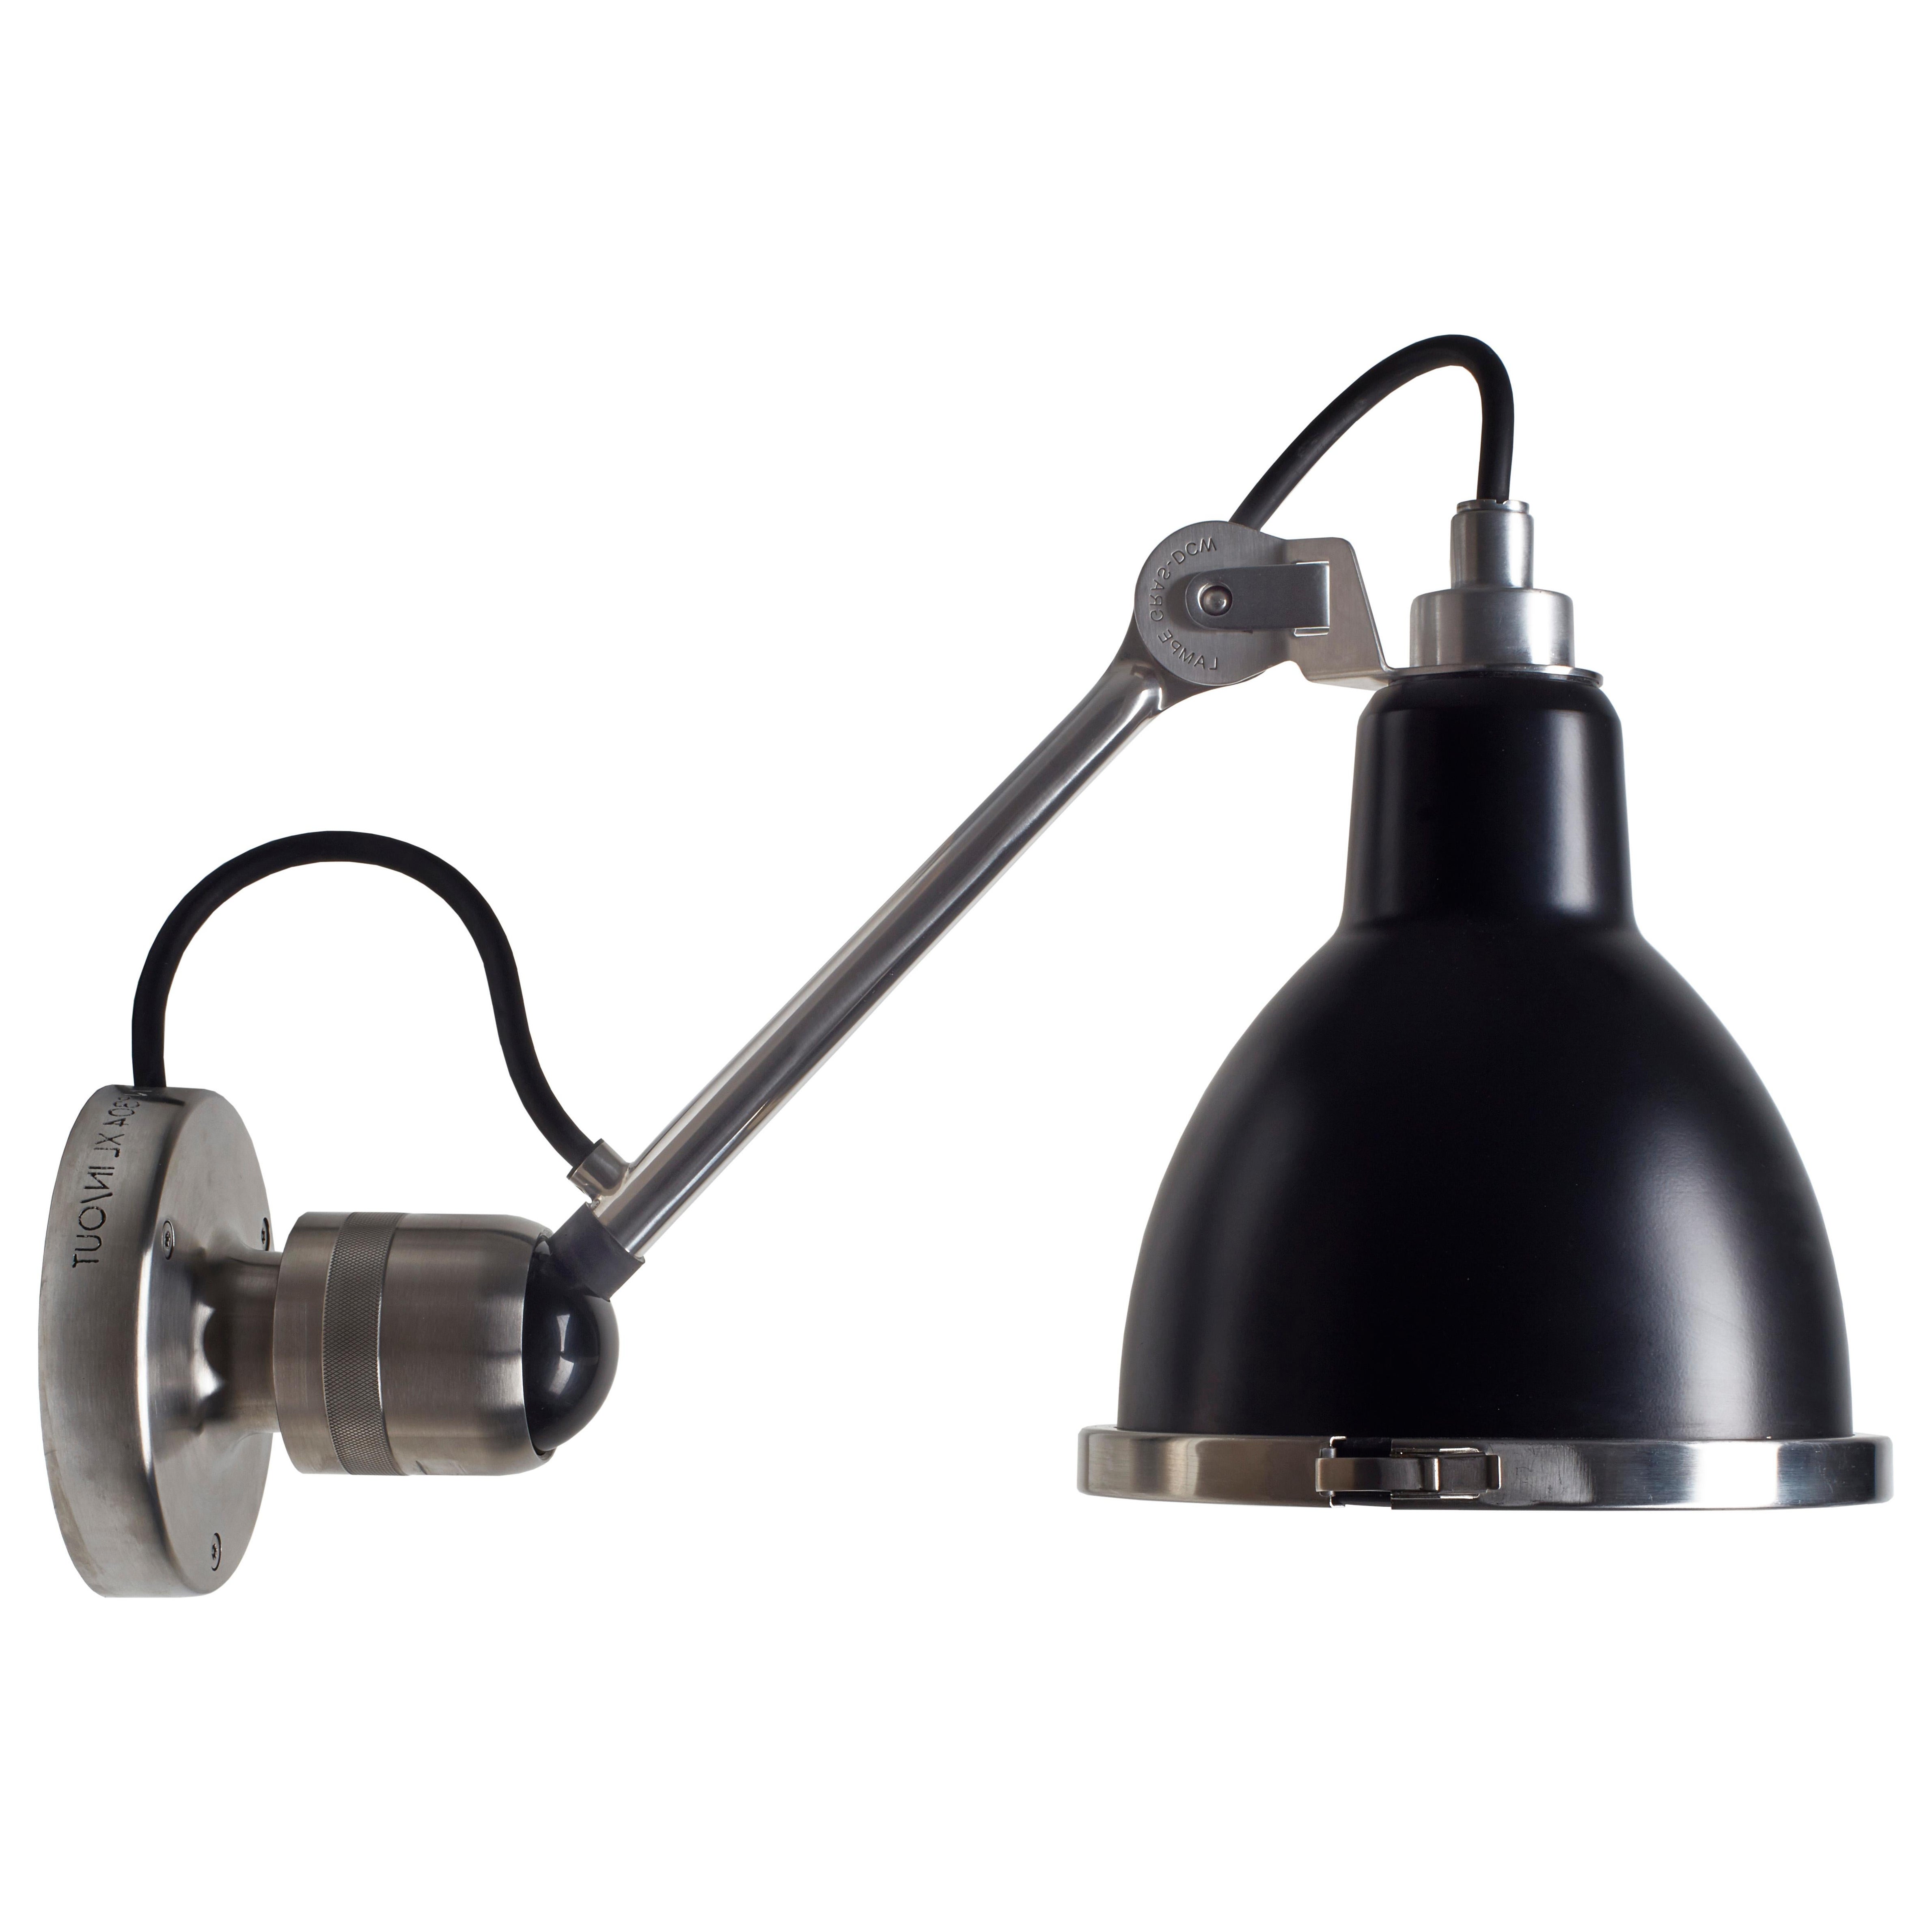 DCW Editions La Lampe Gras N°304 XL Round Wall Lamp in Bare Arm & Black Shade 2 For Sale